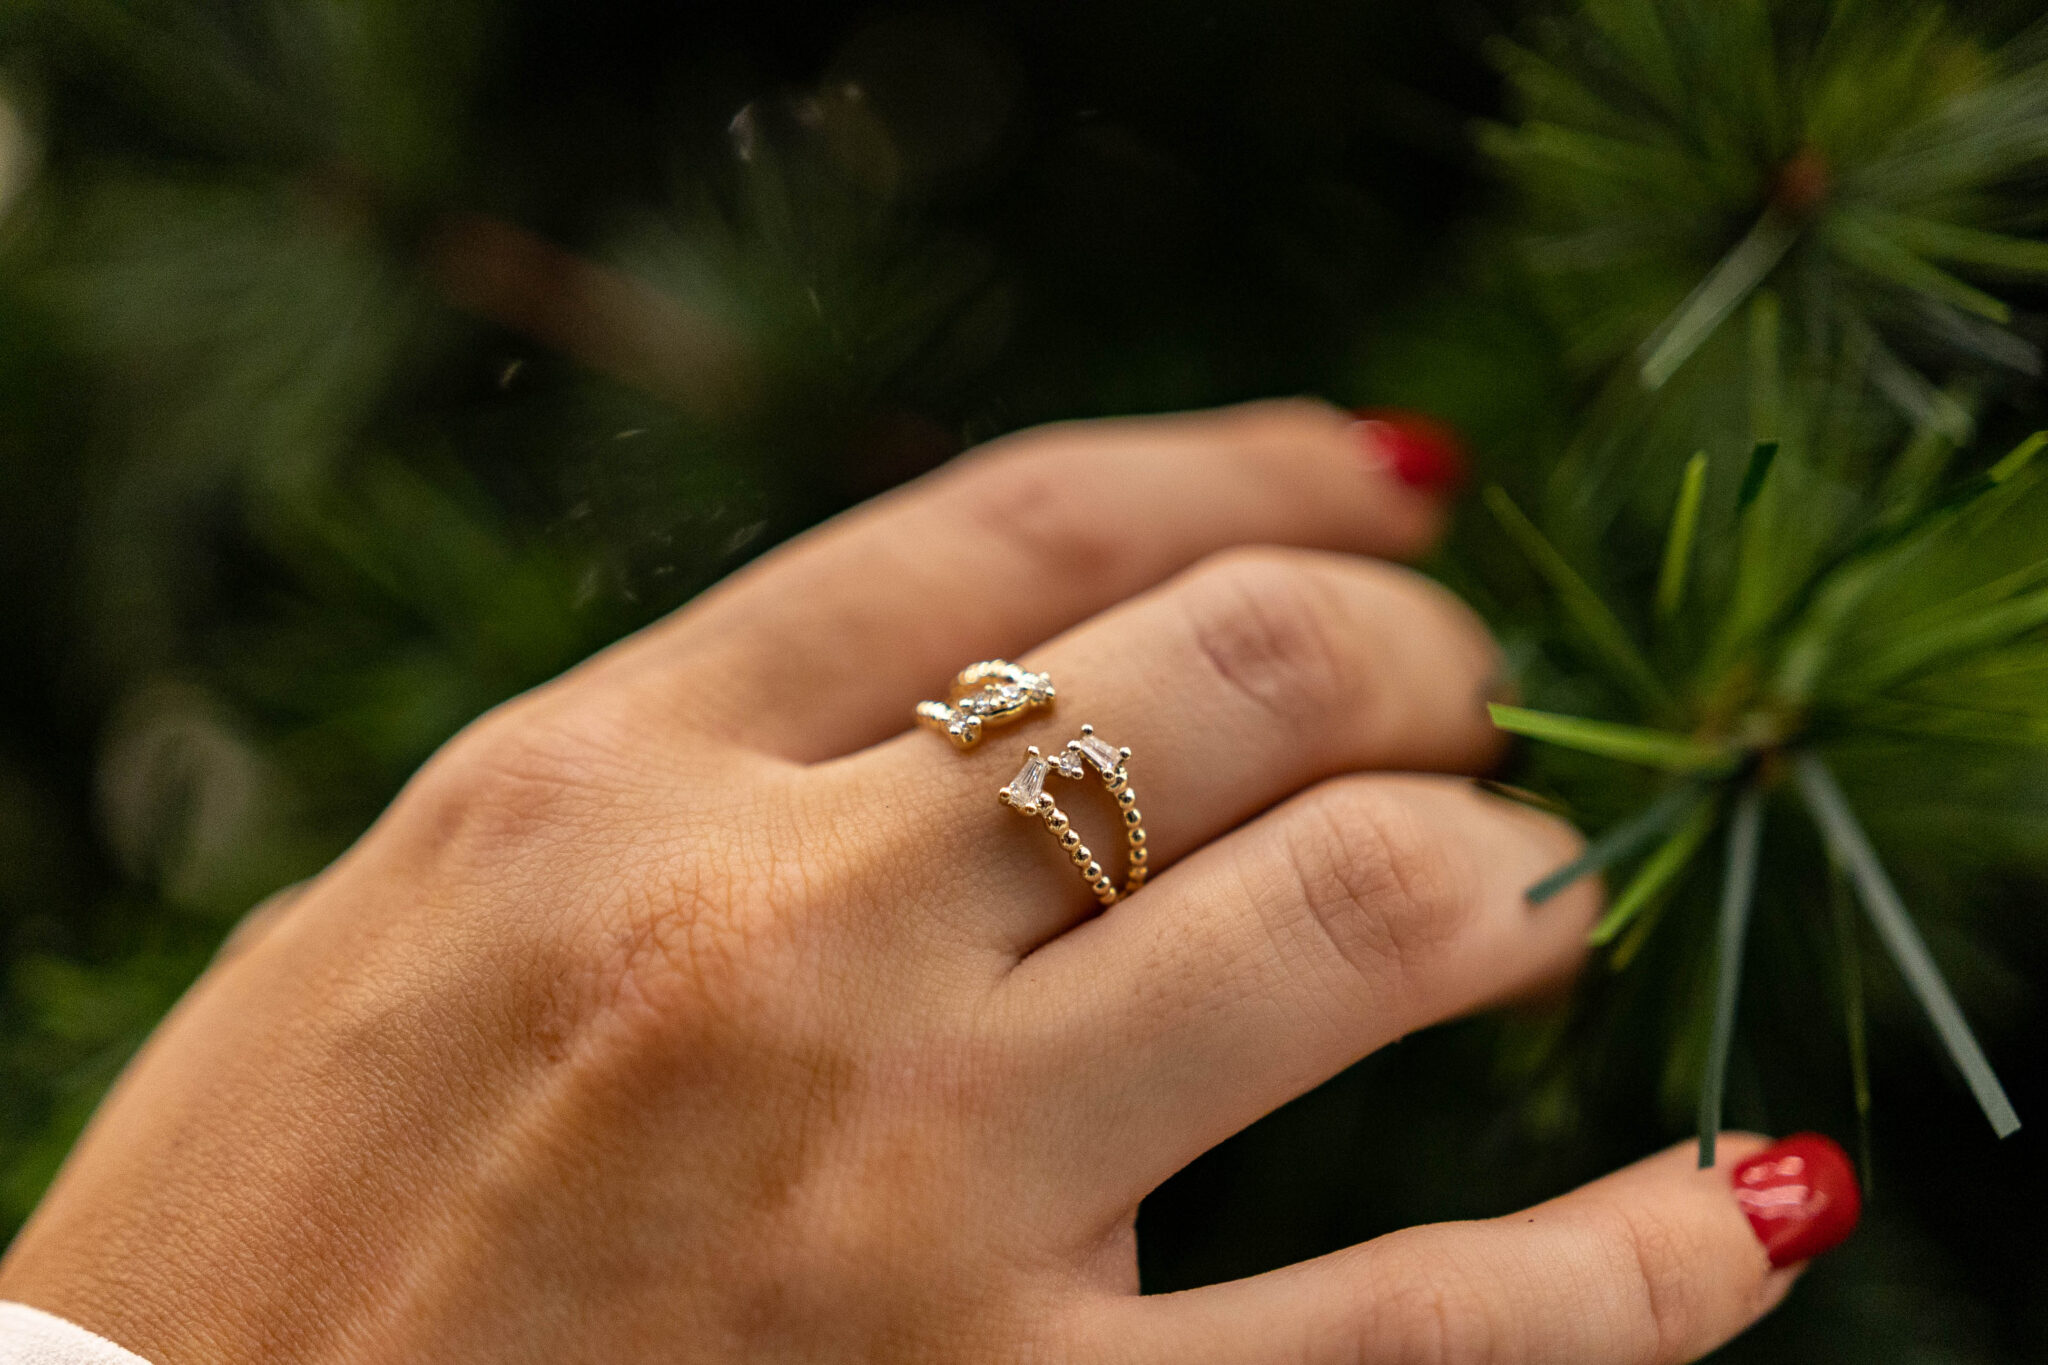 Get amazing holiday gifts + major discounts at the Diamonds Direct Holiday Showcase, Nov. 12-14